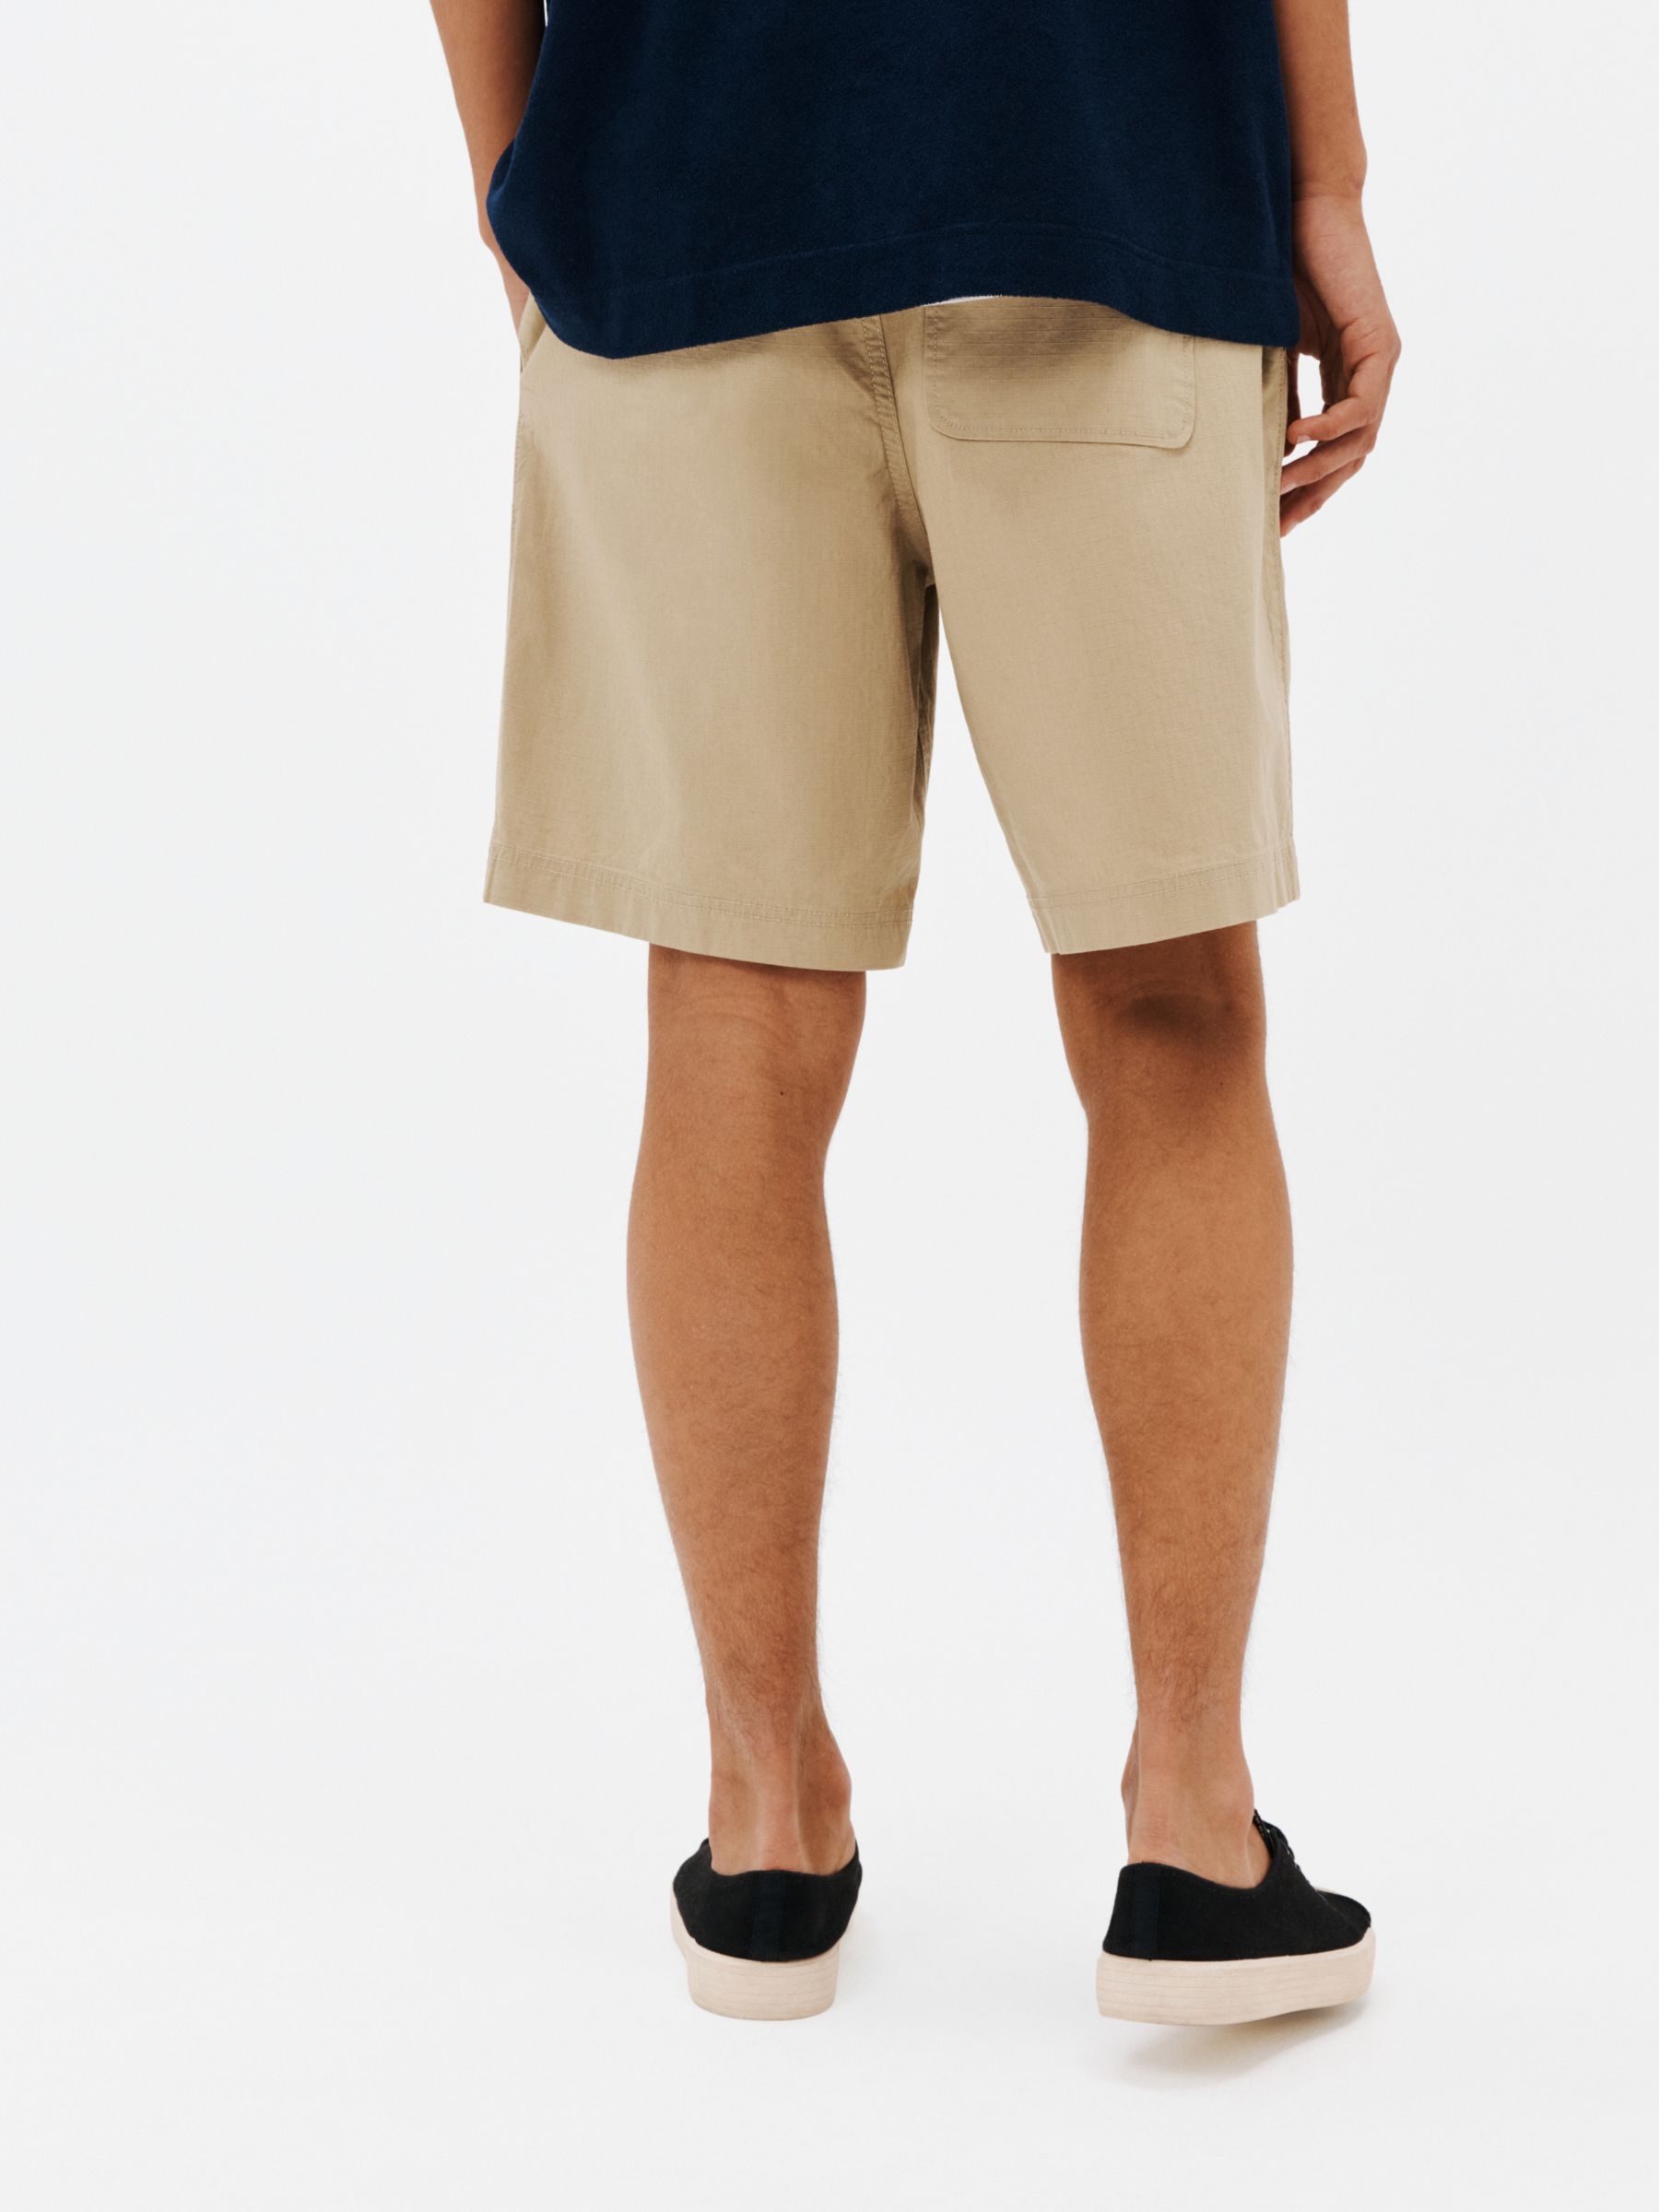 John Lewis ANYDAY Cotton Ripstop Shorts, Sand, S